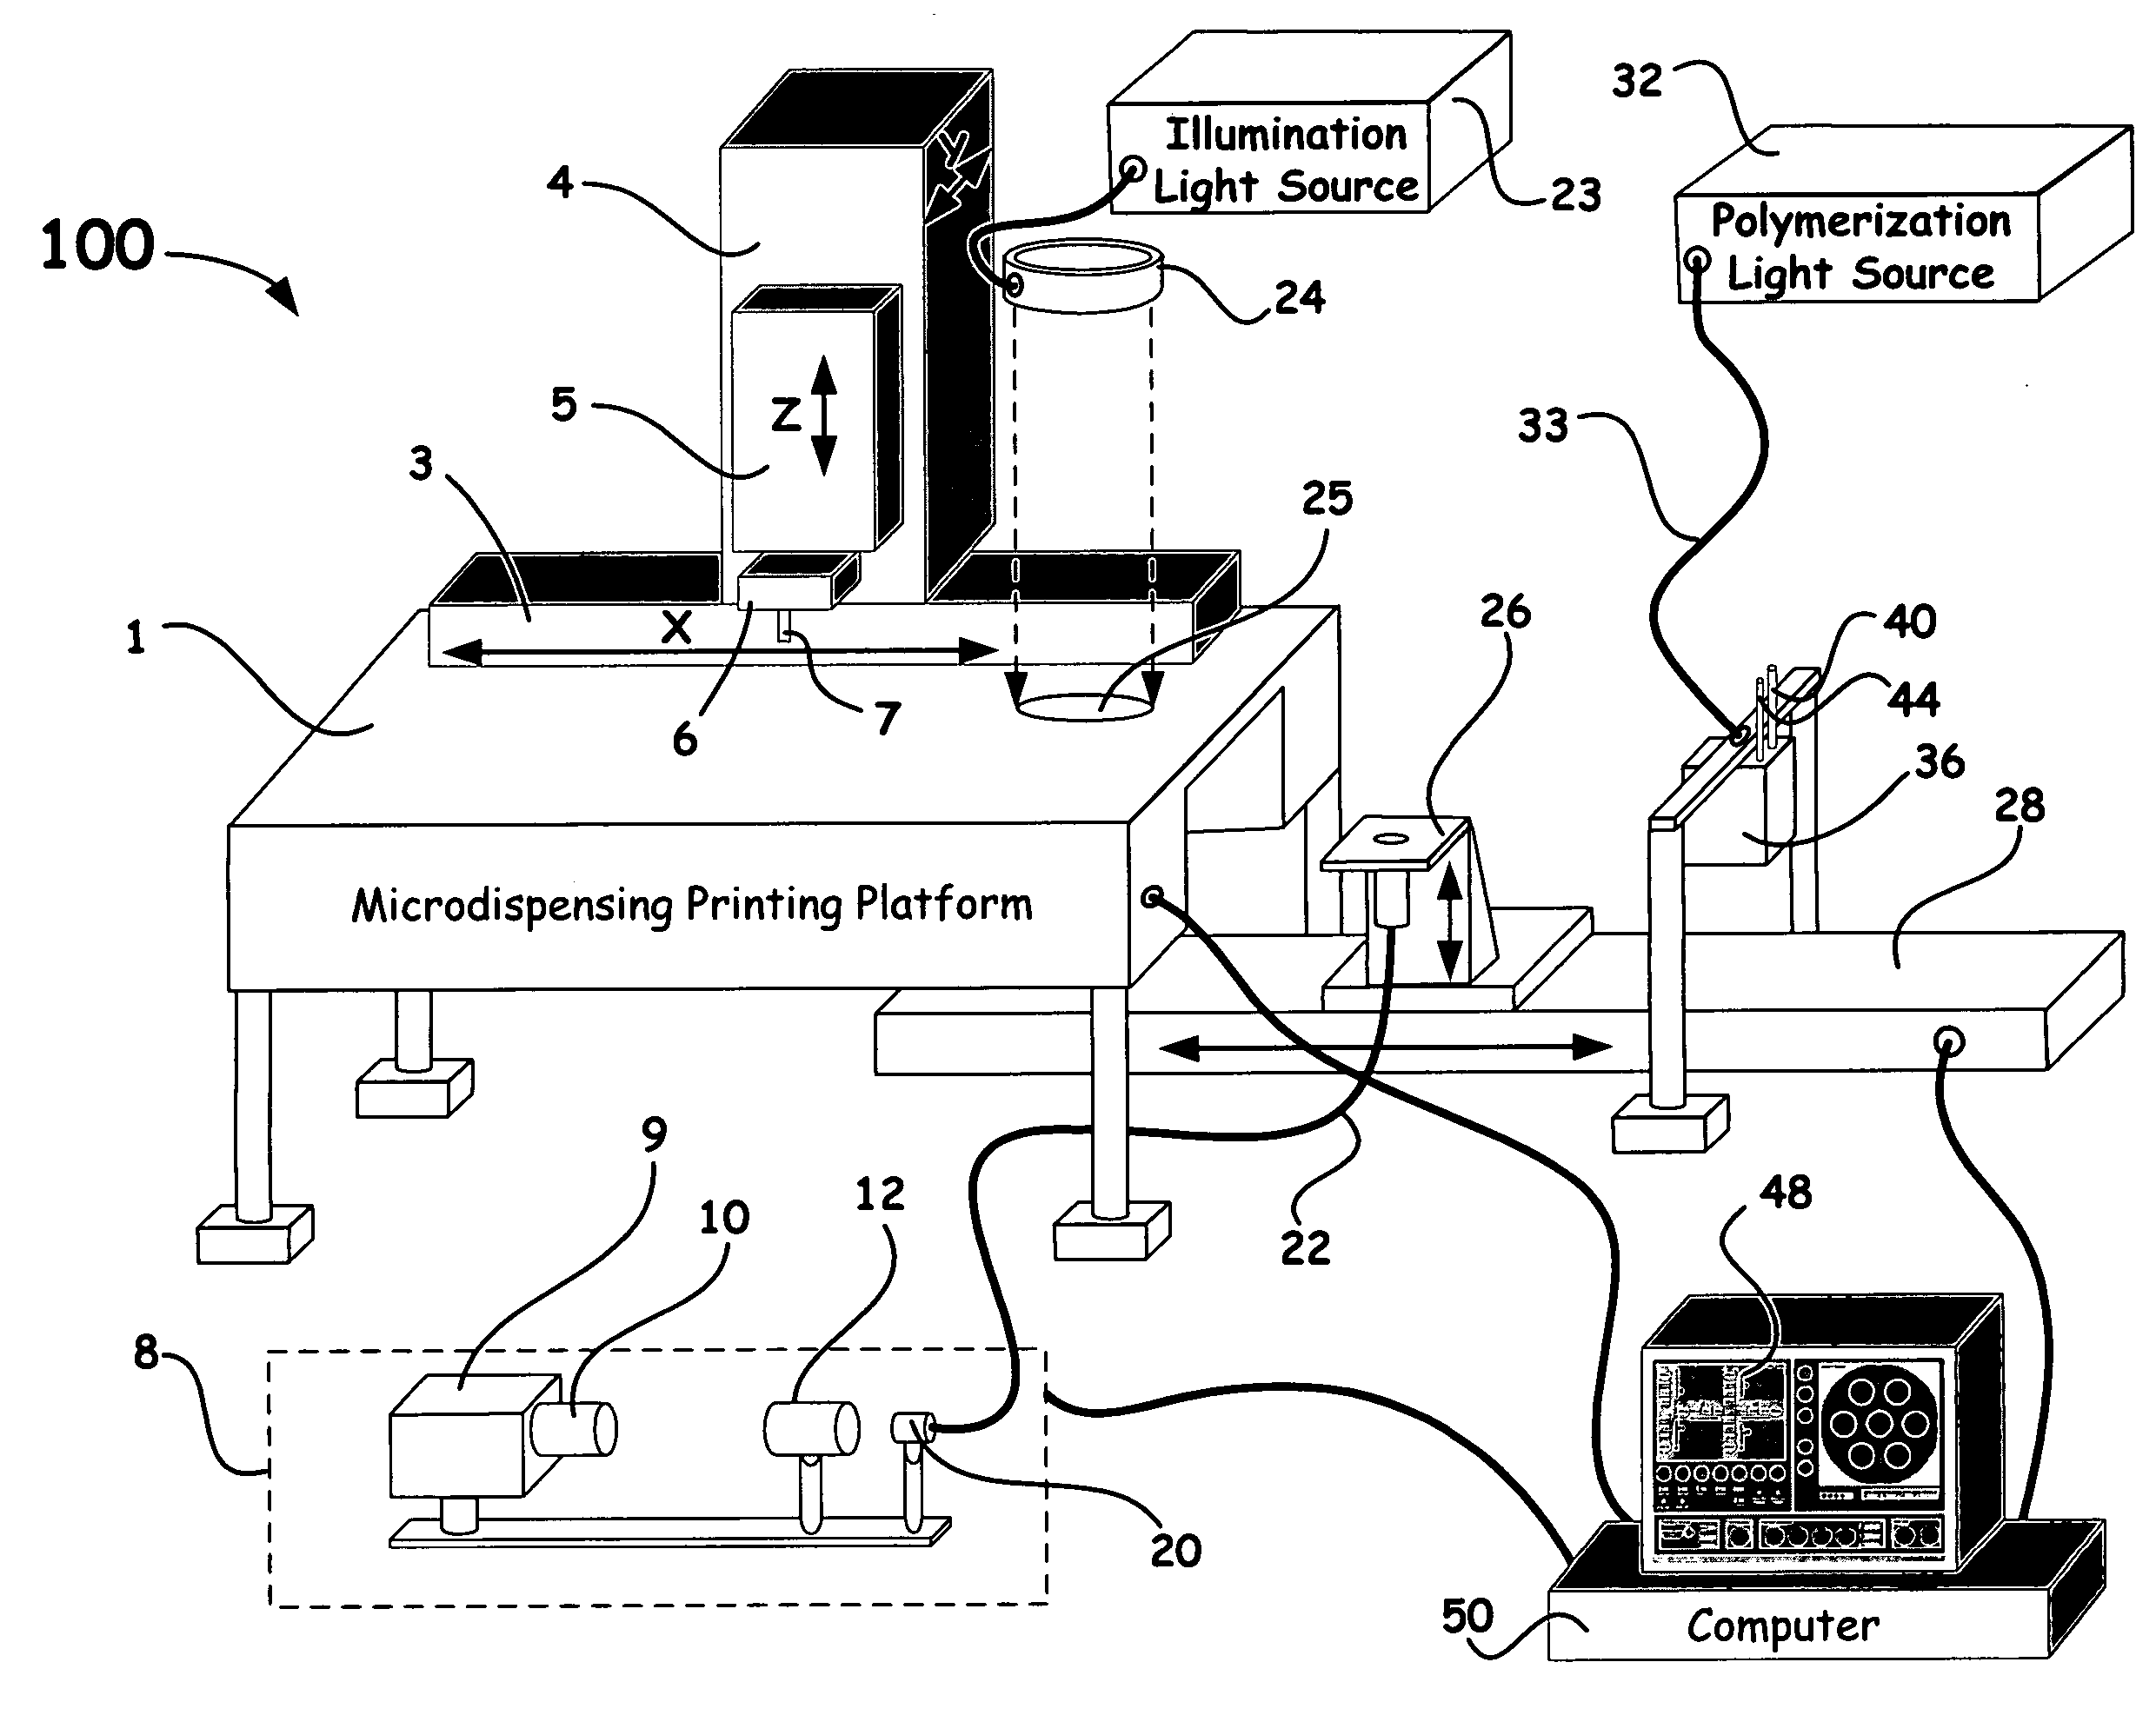 Method for creating chemical sensors using contact-based microdispensing technology